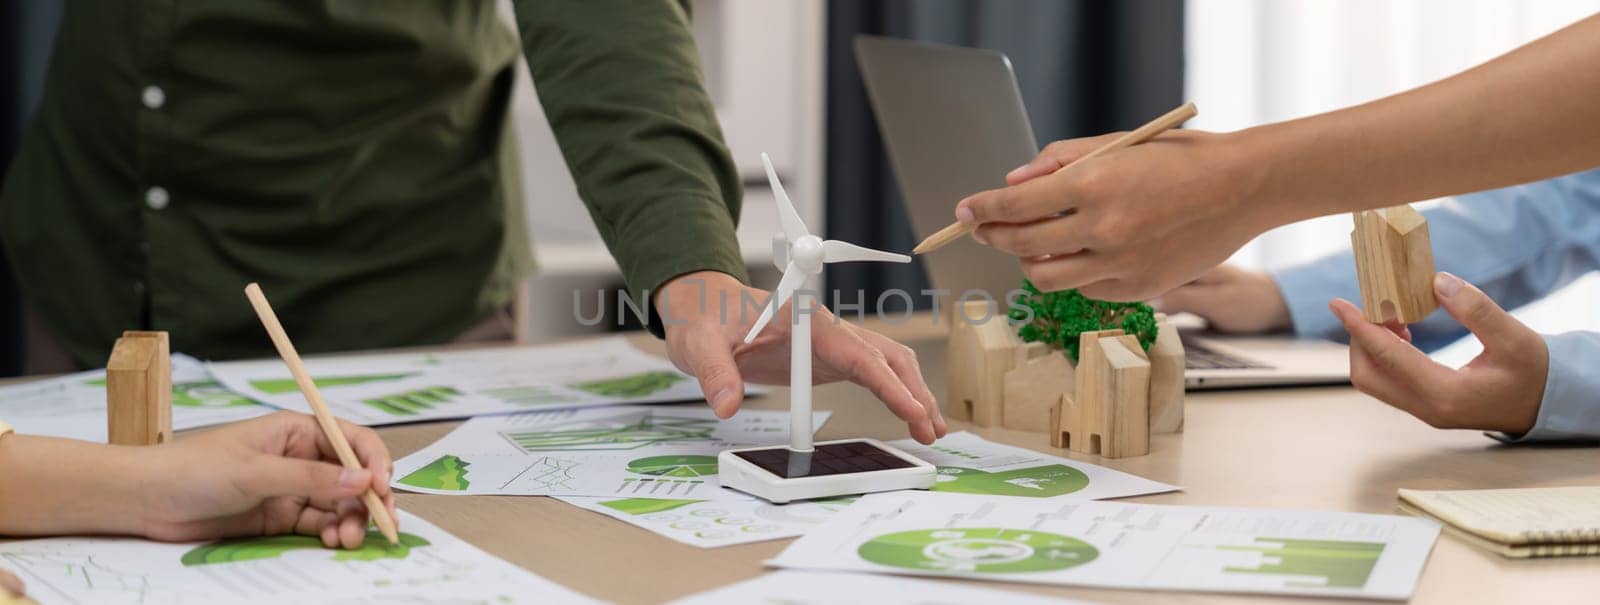 Windmill model represented renewable energy and wooden block represented eco city was placed on green business meeting table with environmental document scatter around. Front view. Delineation.